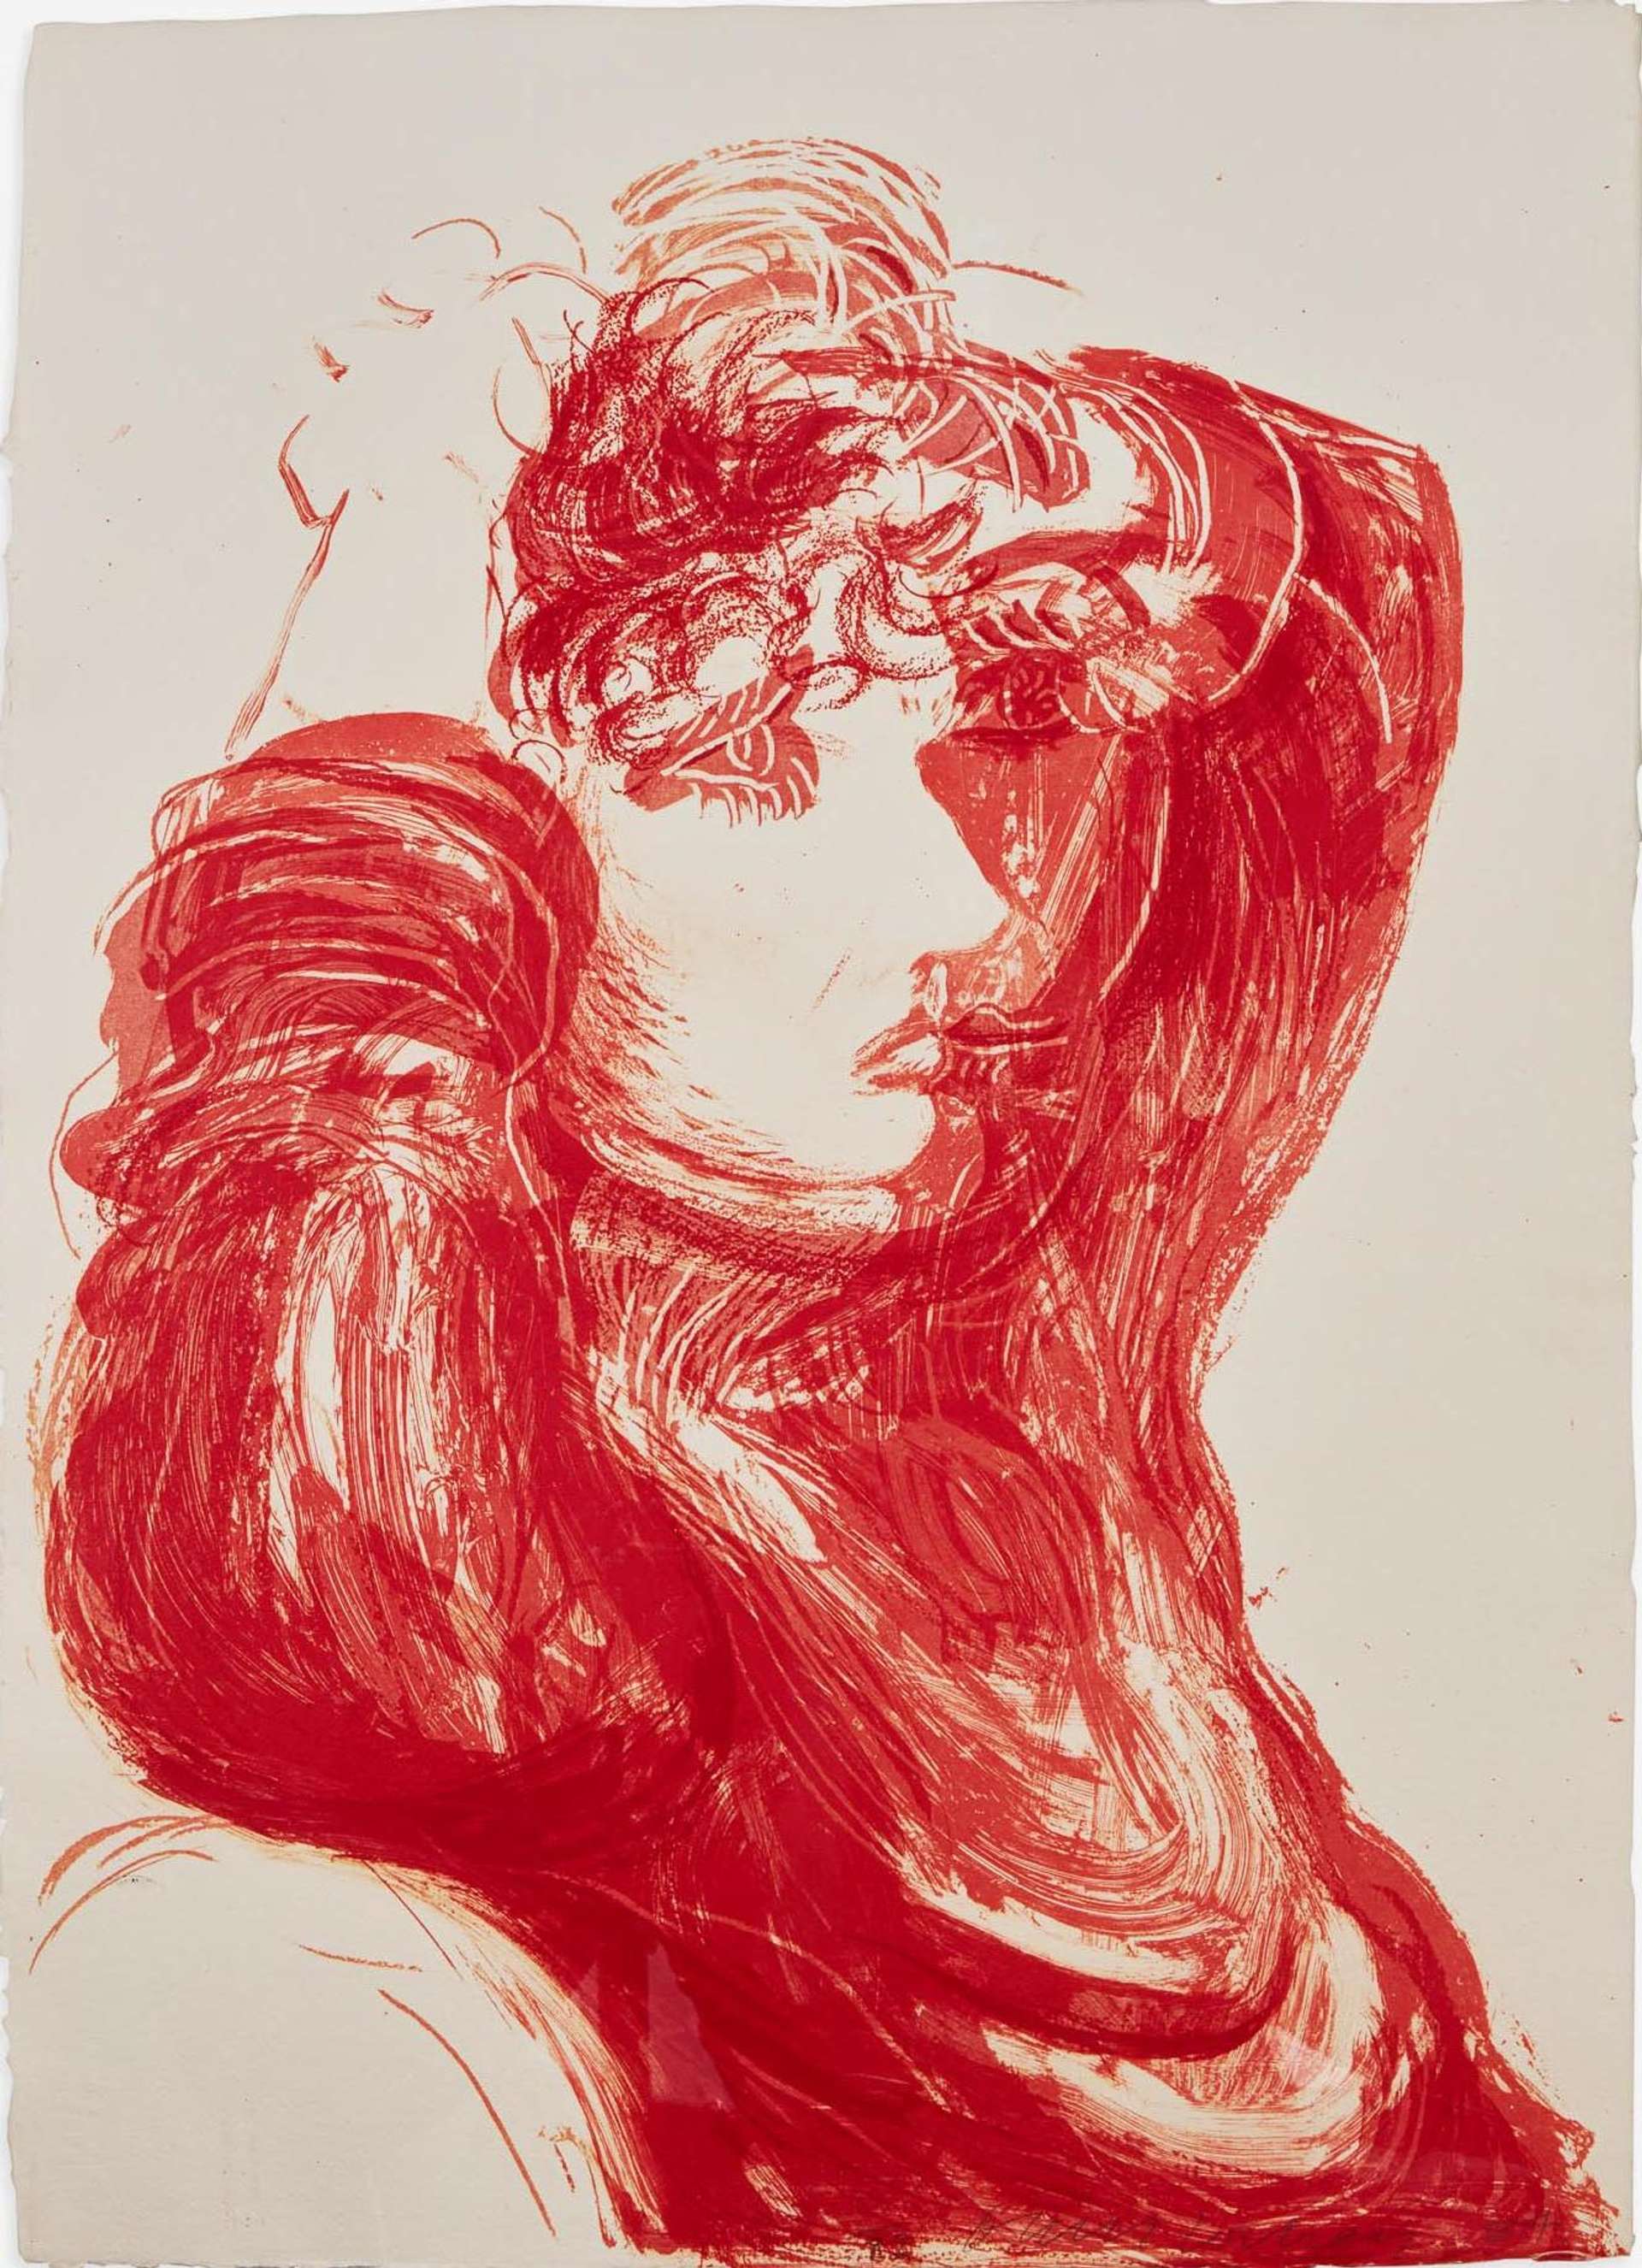  David Hockney's Red Celia. A Cubism-style lithographic print of the side profile of a woman, coloured in red.